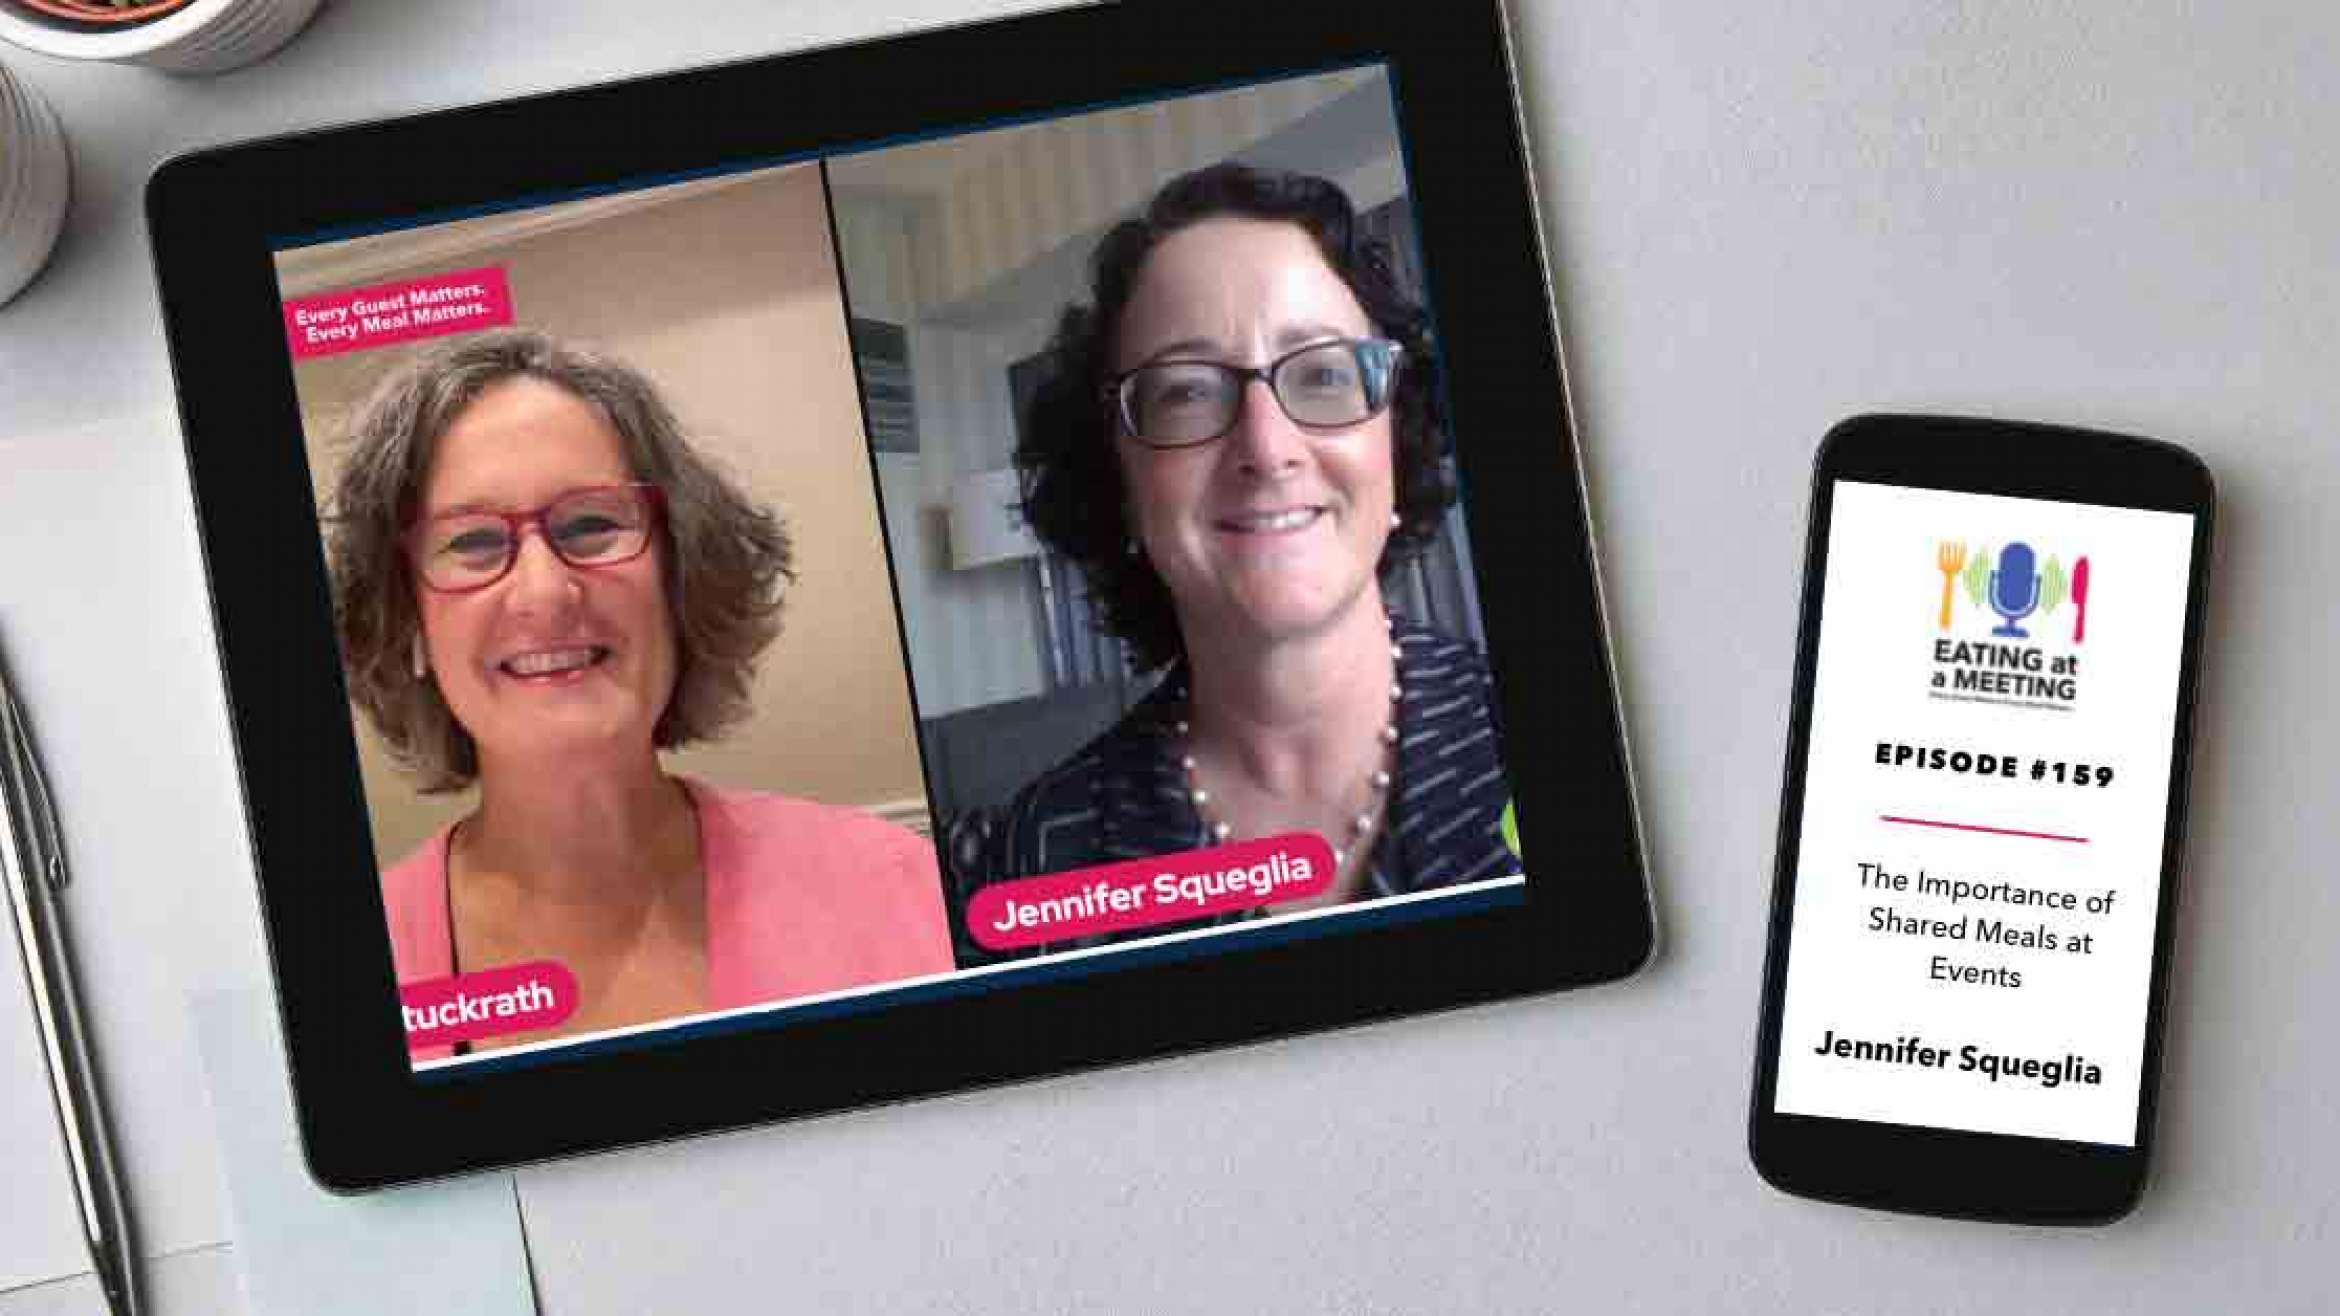 An iPad and iPhone on a table. On the iPad is a picture of two men who are on video screen. On the iPhone is the Eating at a Meeting podcast logo with Episode #159 The Importance of Shared Meals at Events with Jennifer Squeglia